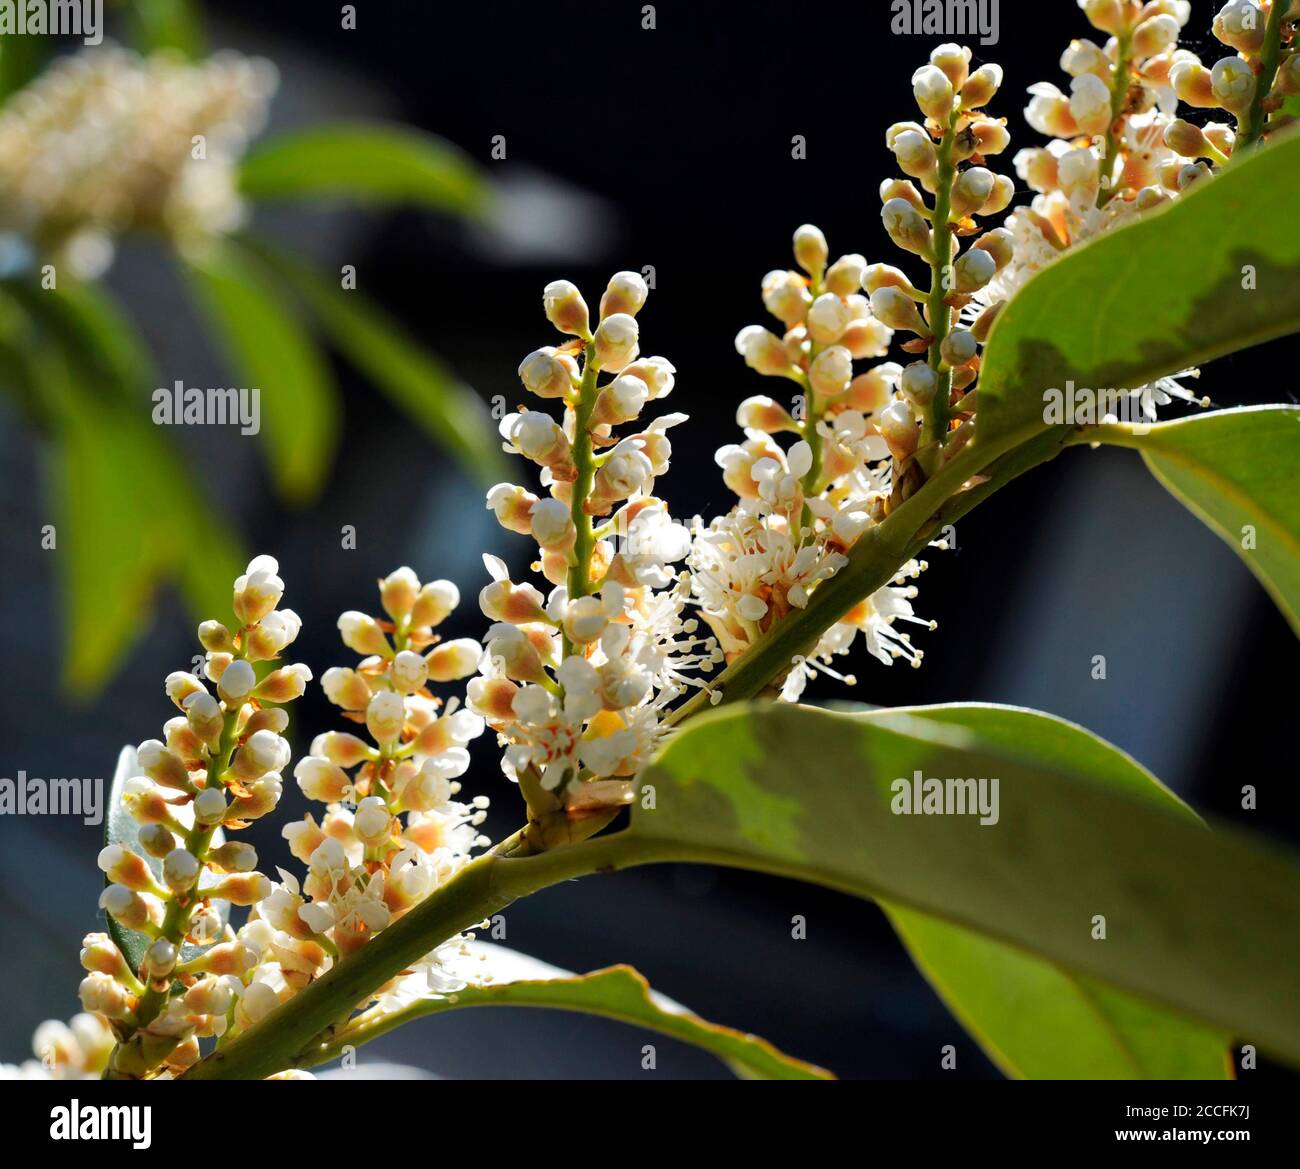 Blossoms of the cherry laurel Prunus laurocerasus, also laurel cherry, an attractive ornamental shrub in the garden and park Stock Photo